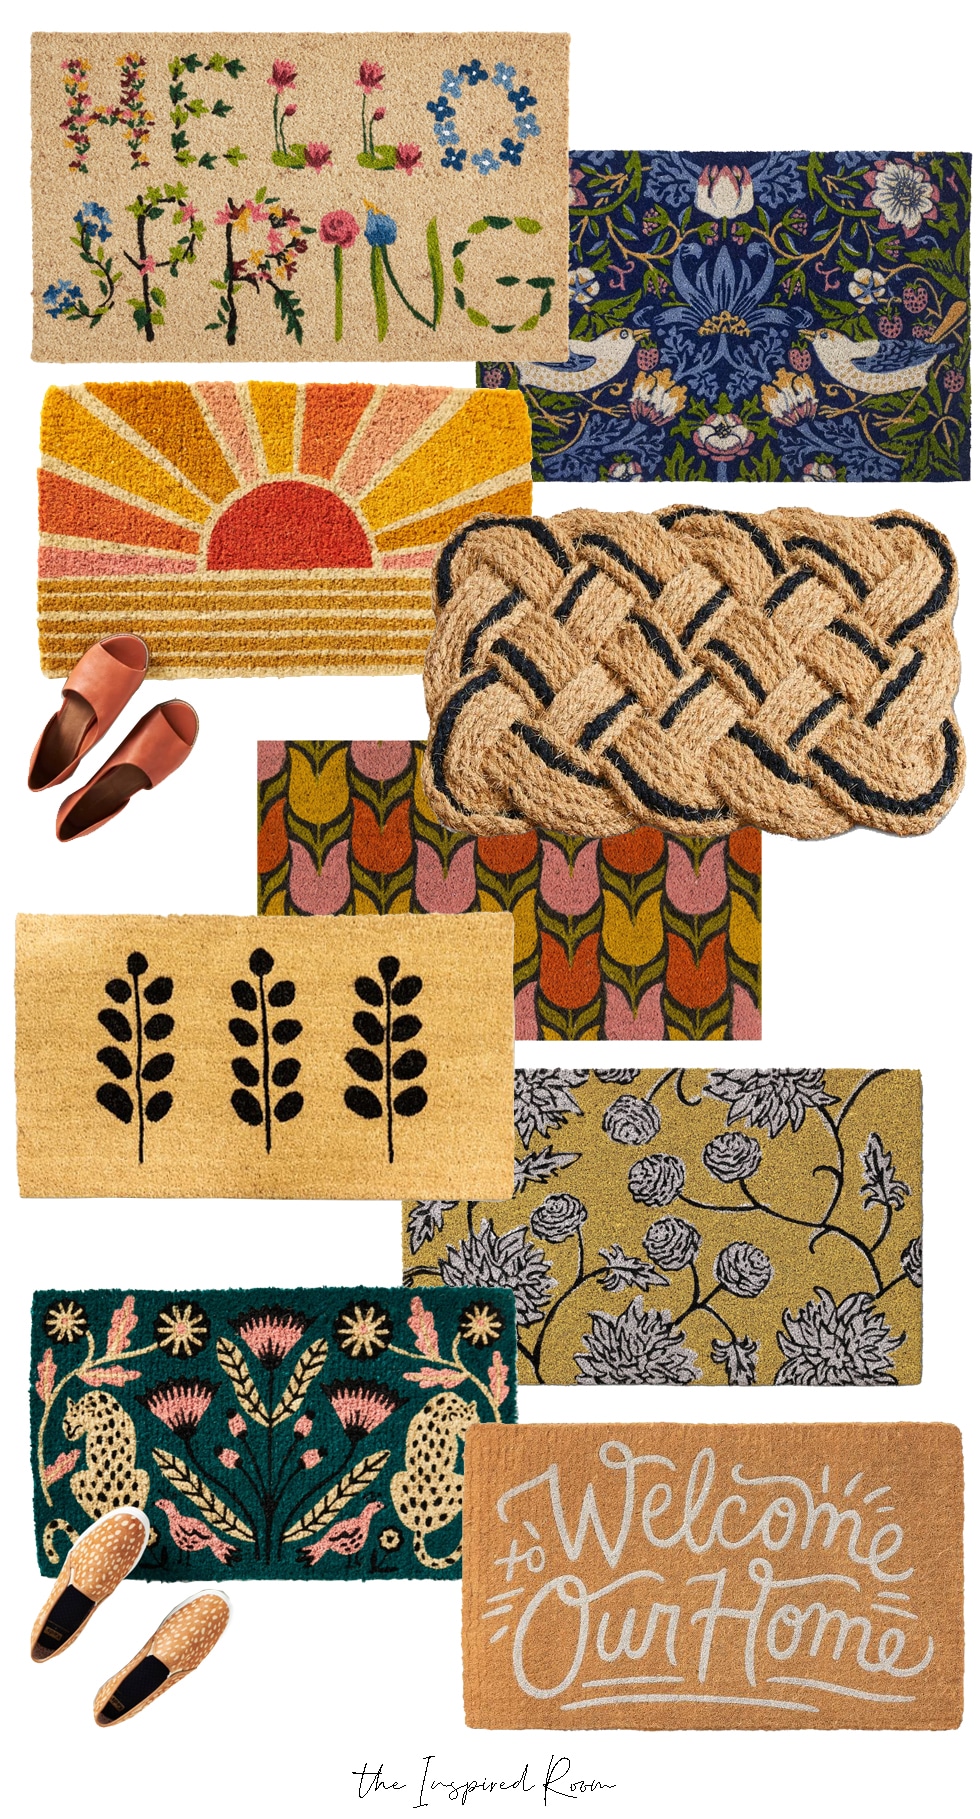 Make Your Entry Lovely: Spring Doormats 2022